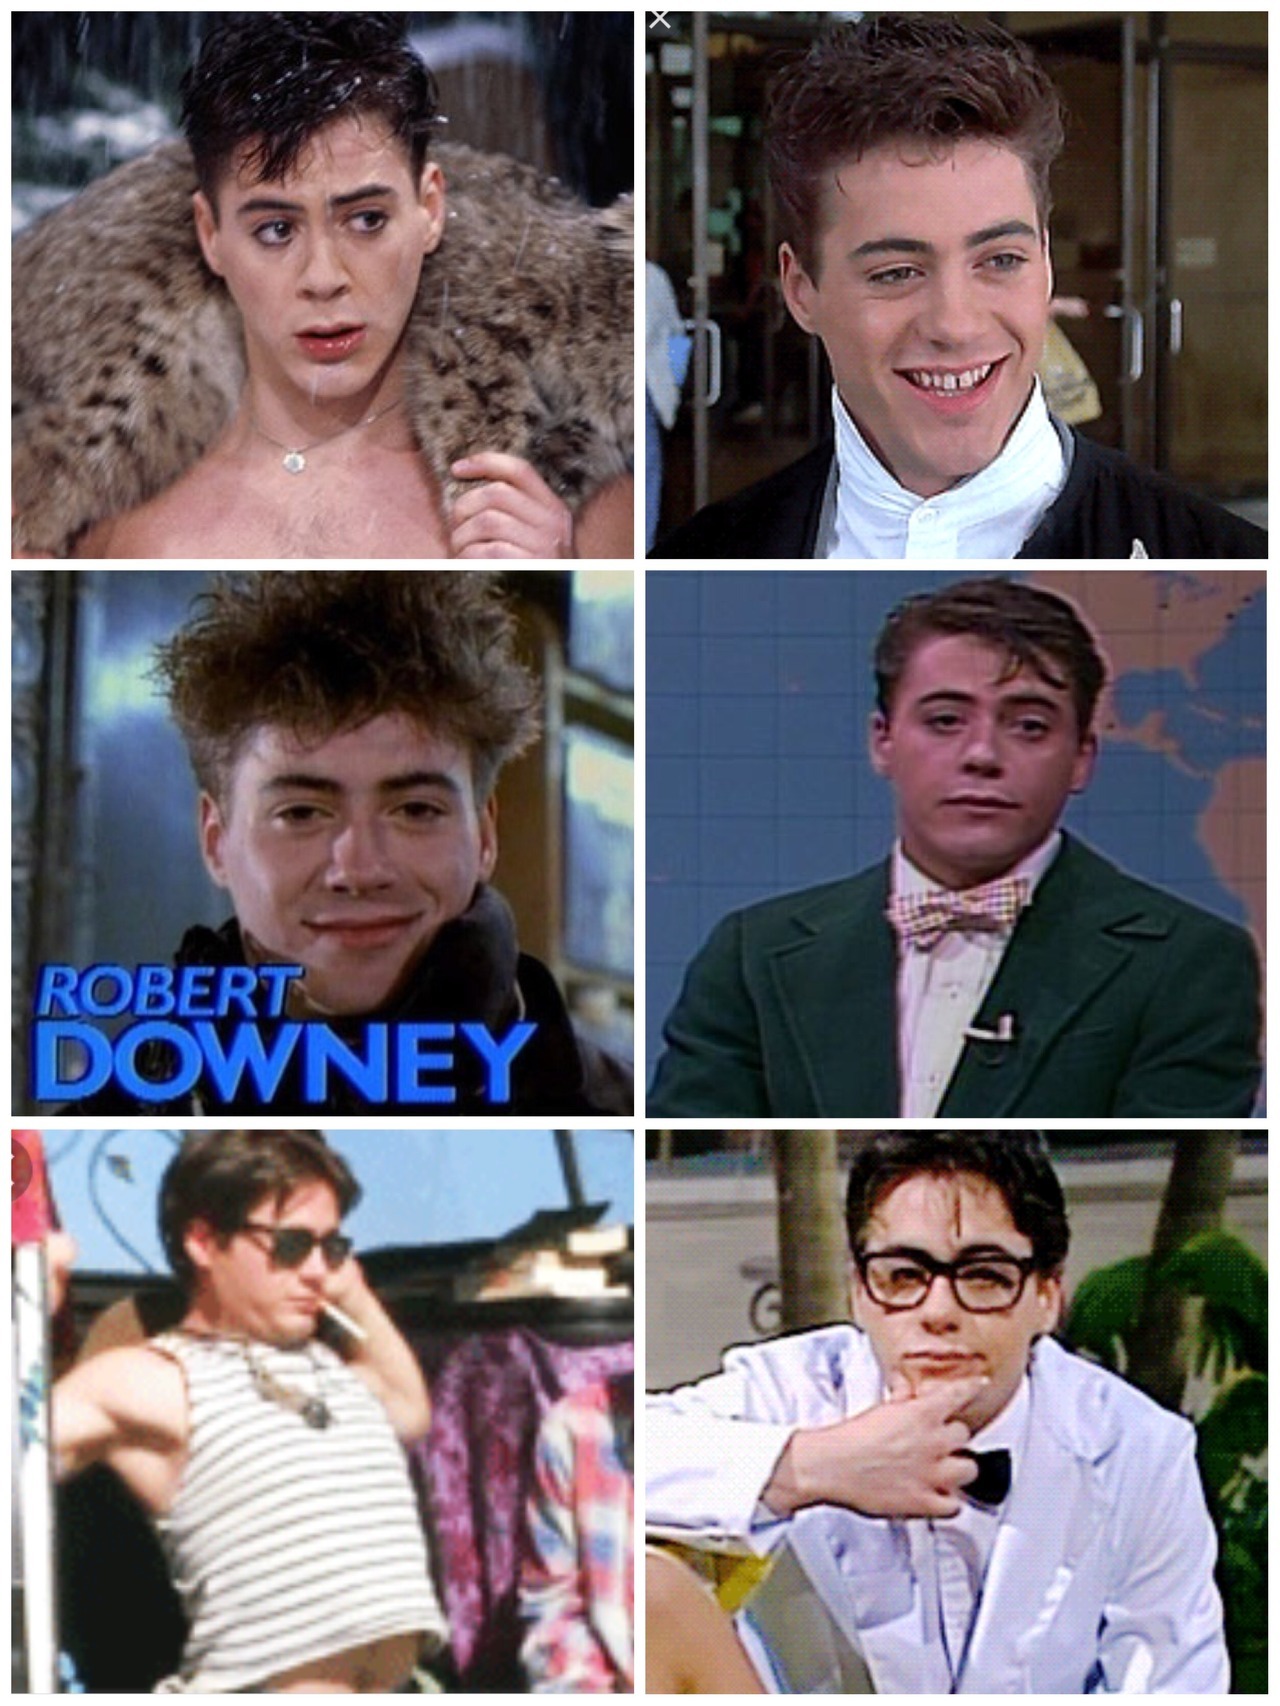 Incy Wincy Spidey — oh are we talking about young robert downey jr.??...